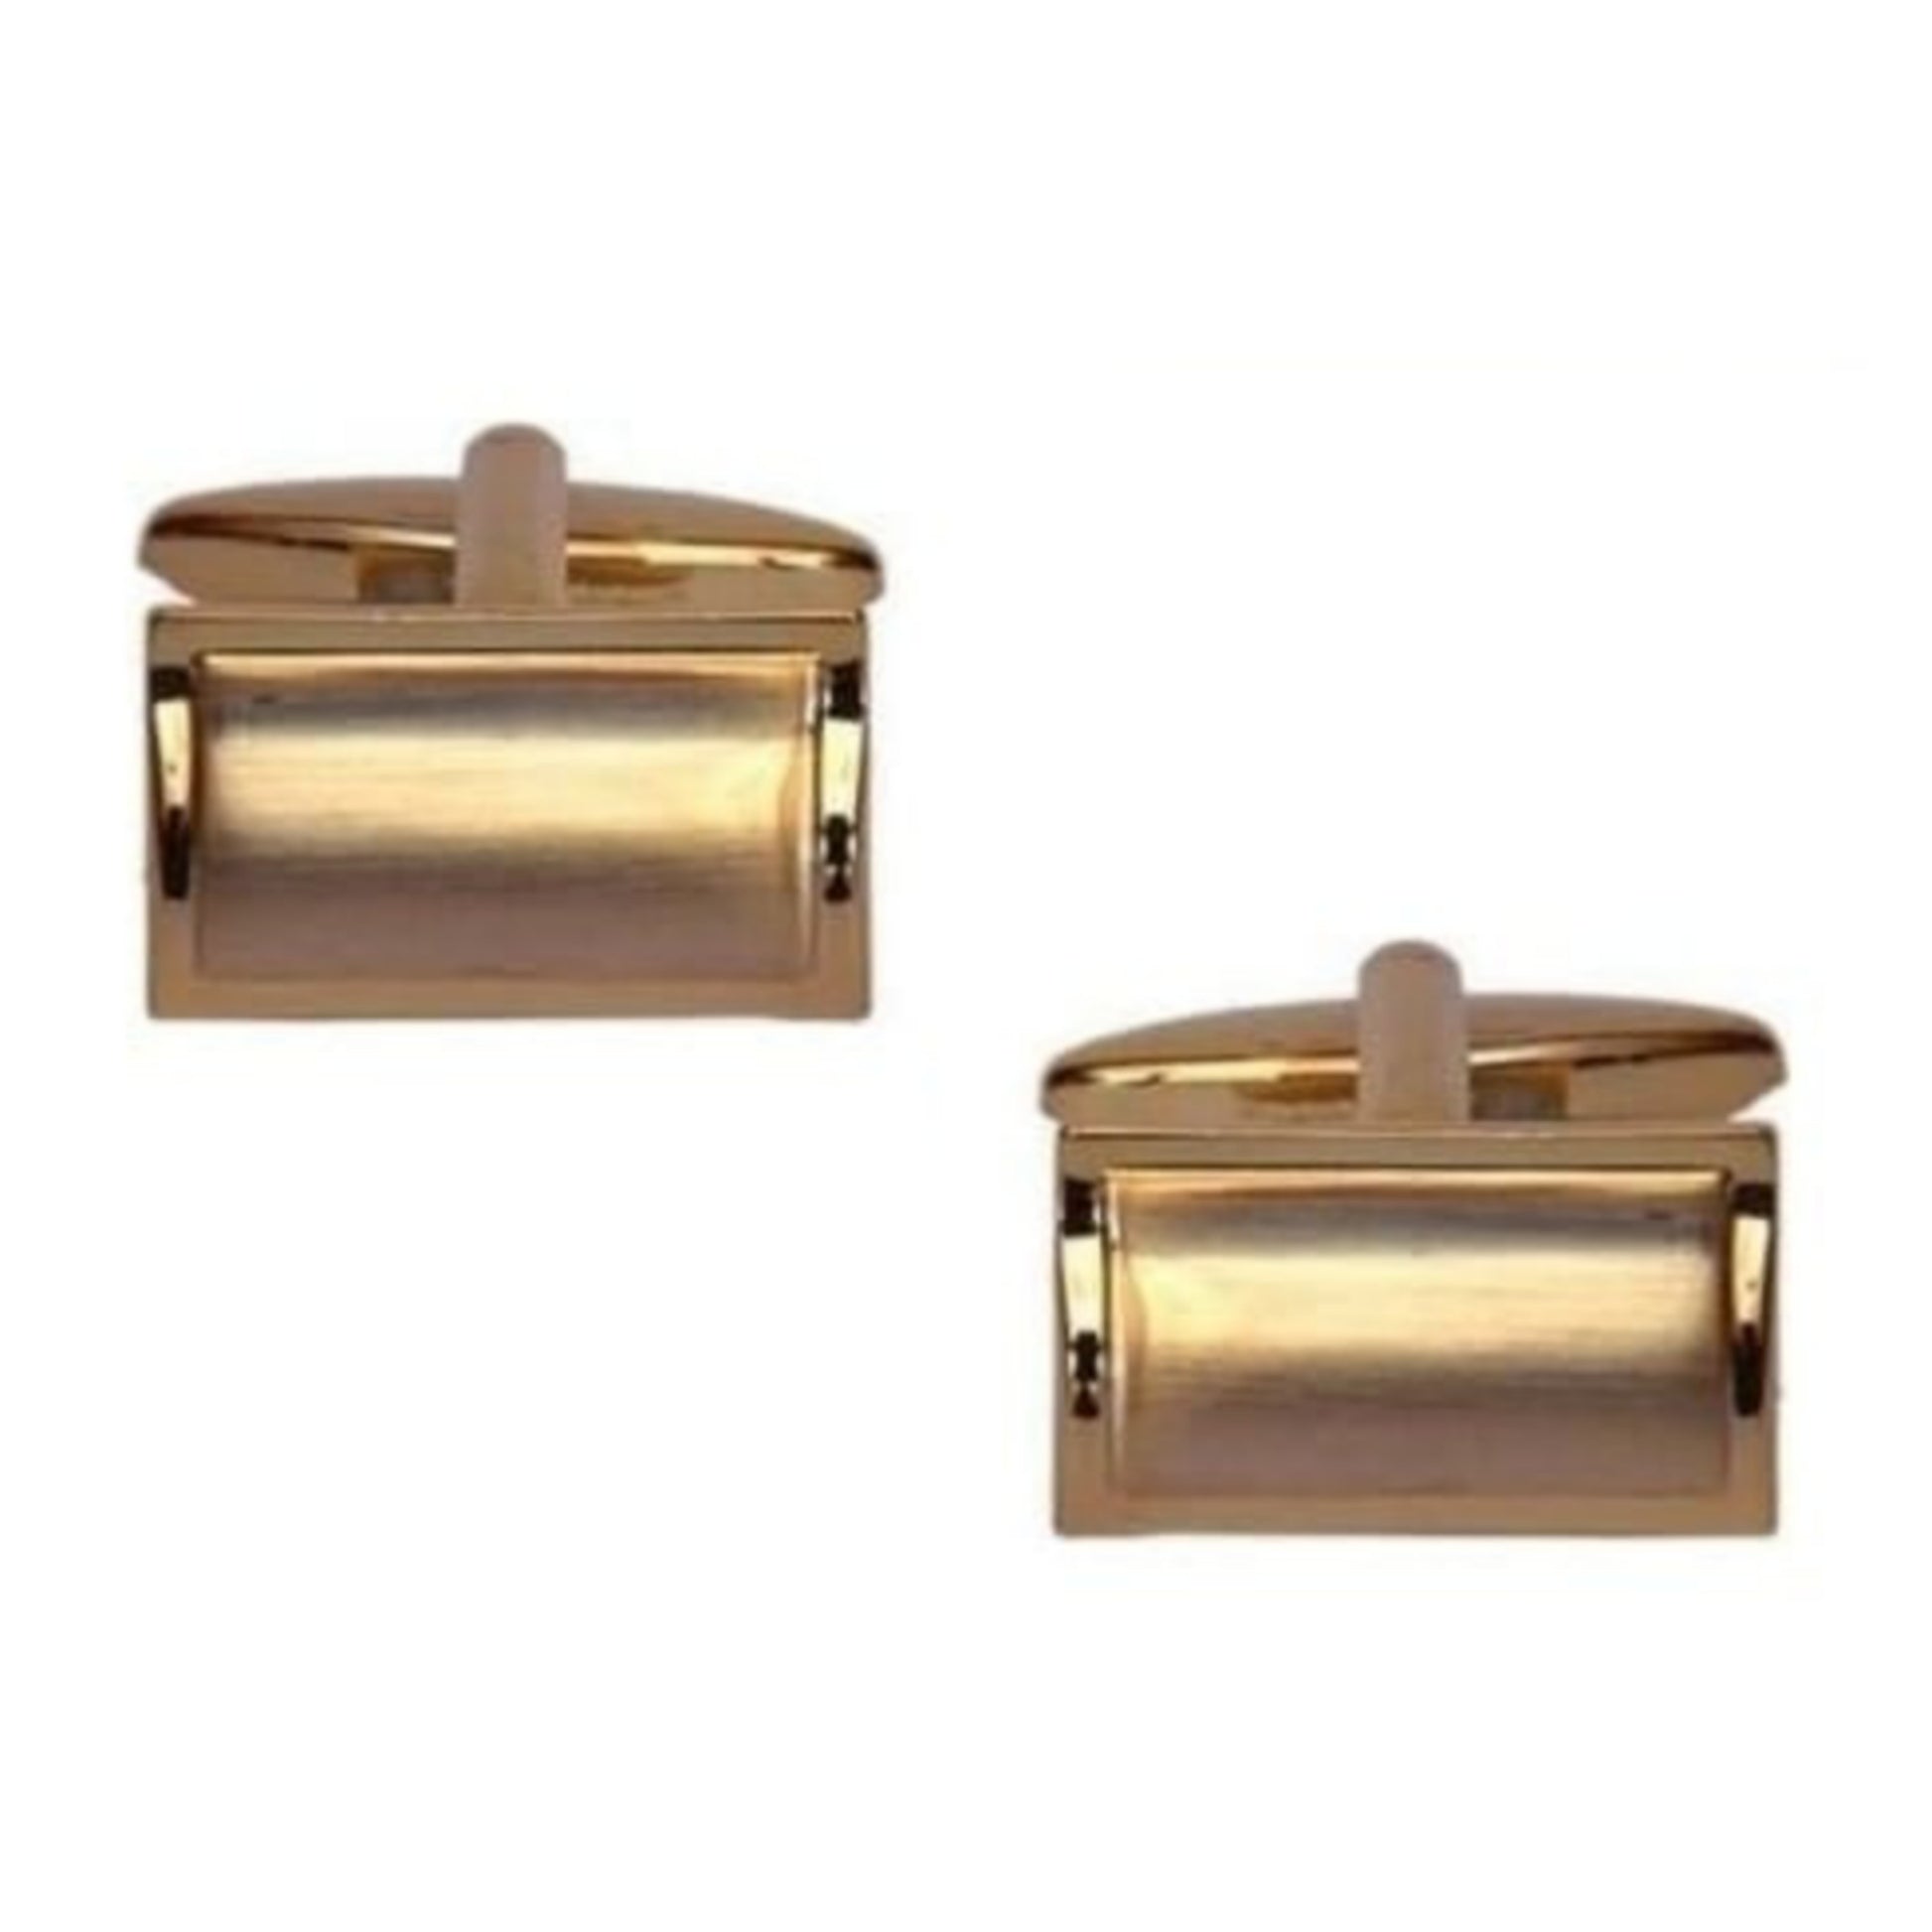 Shiny Edge Brushed Gold Plated Rectangular Curved Cufflinks - HK Jewels